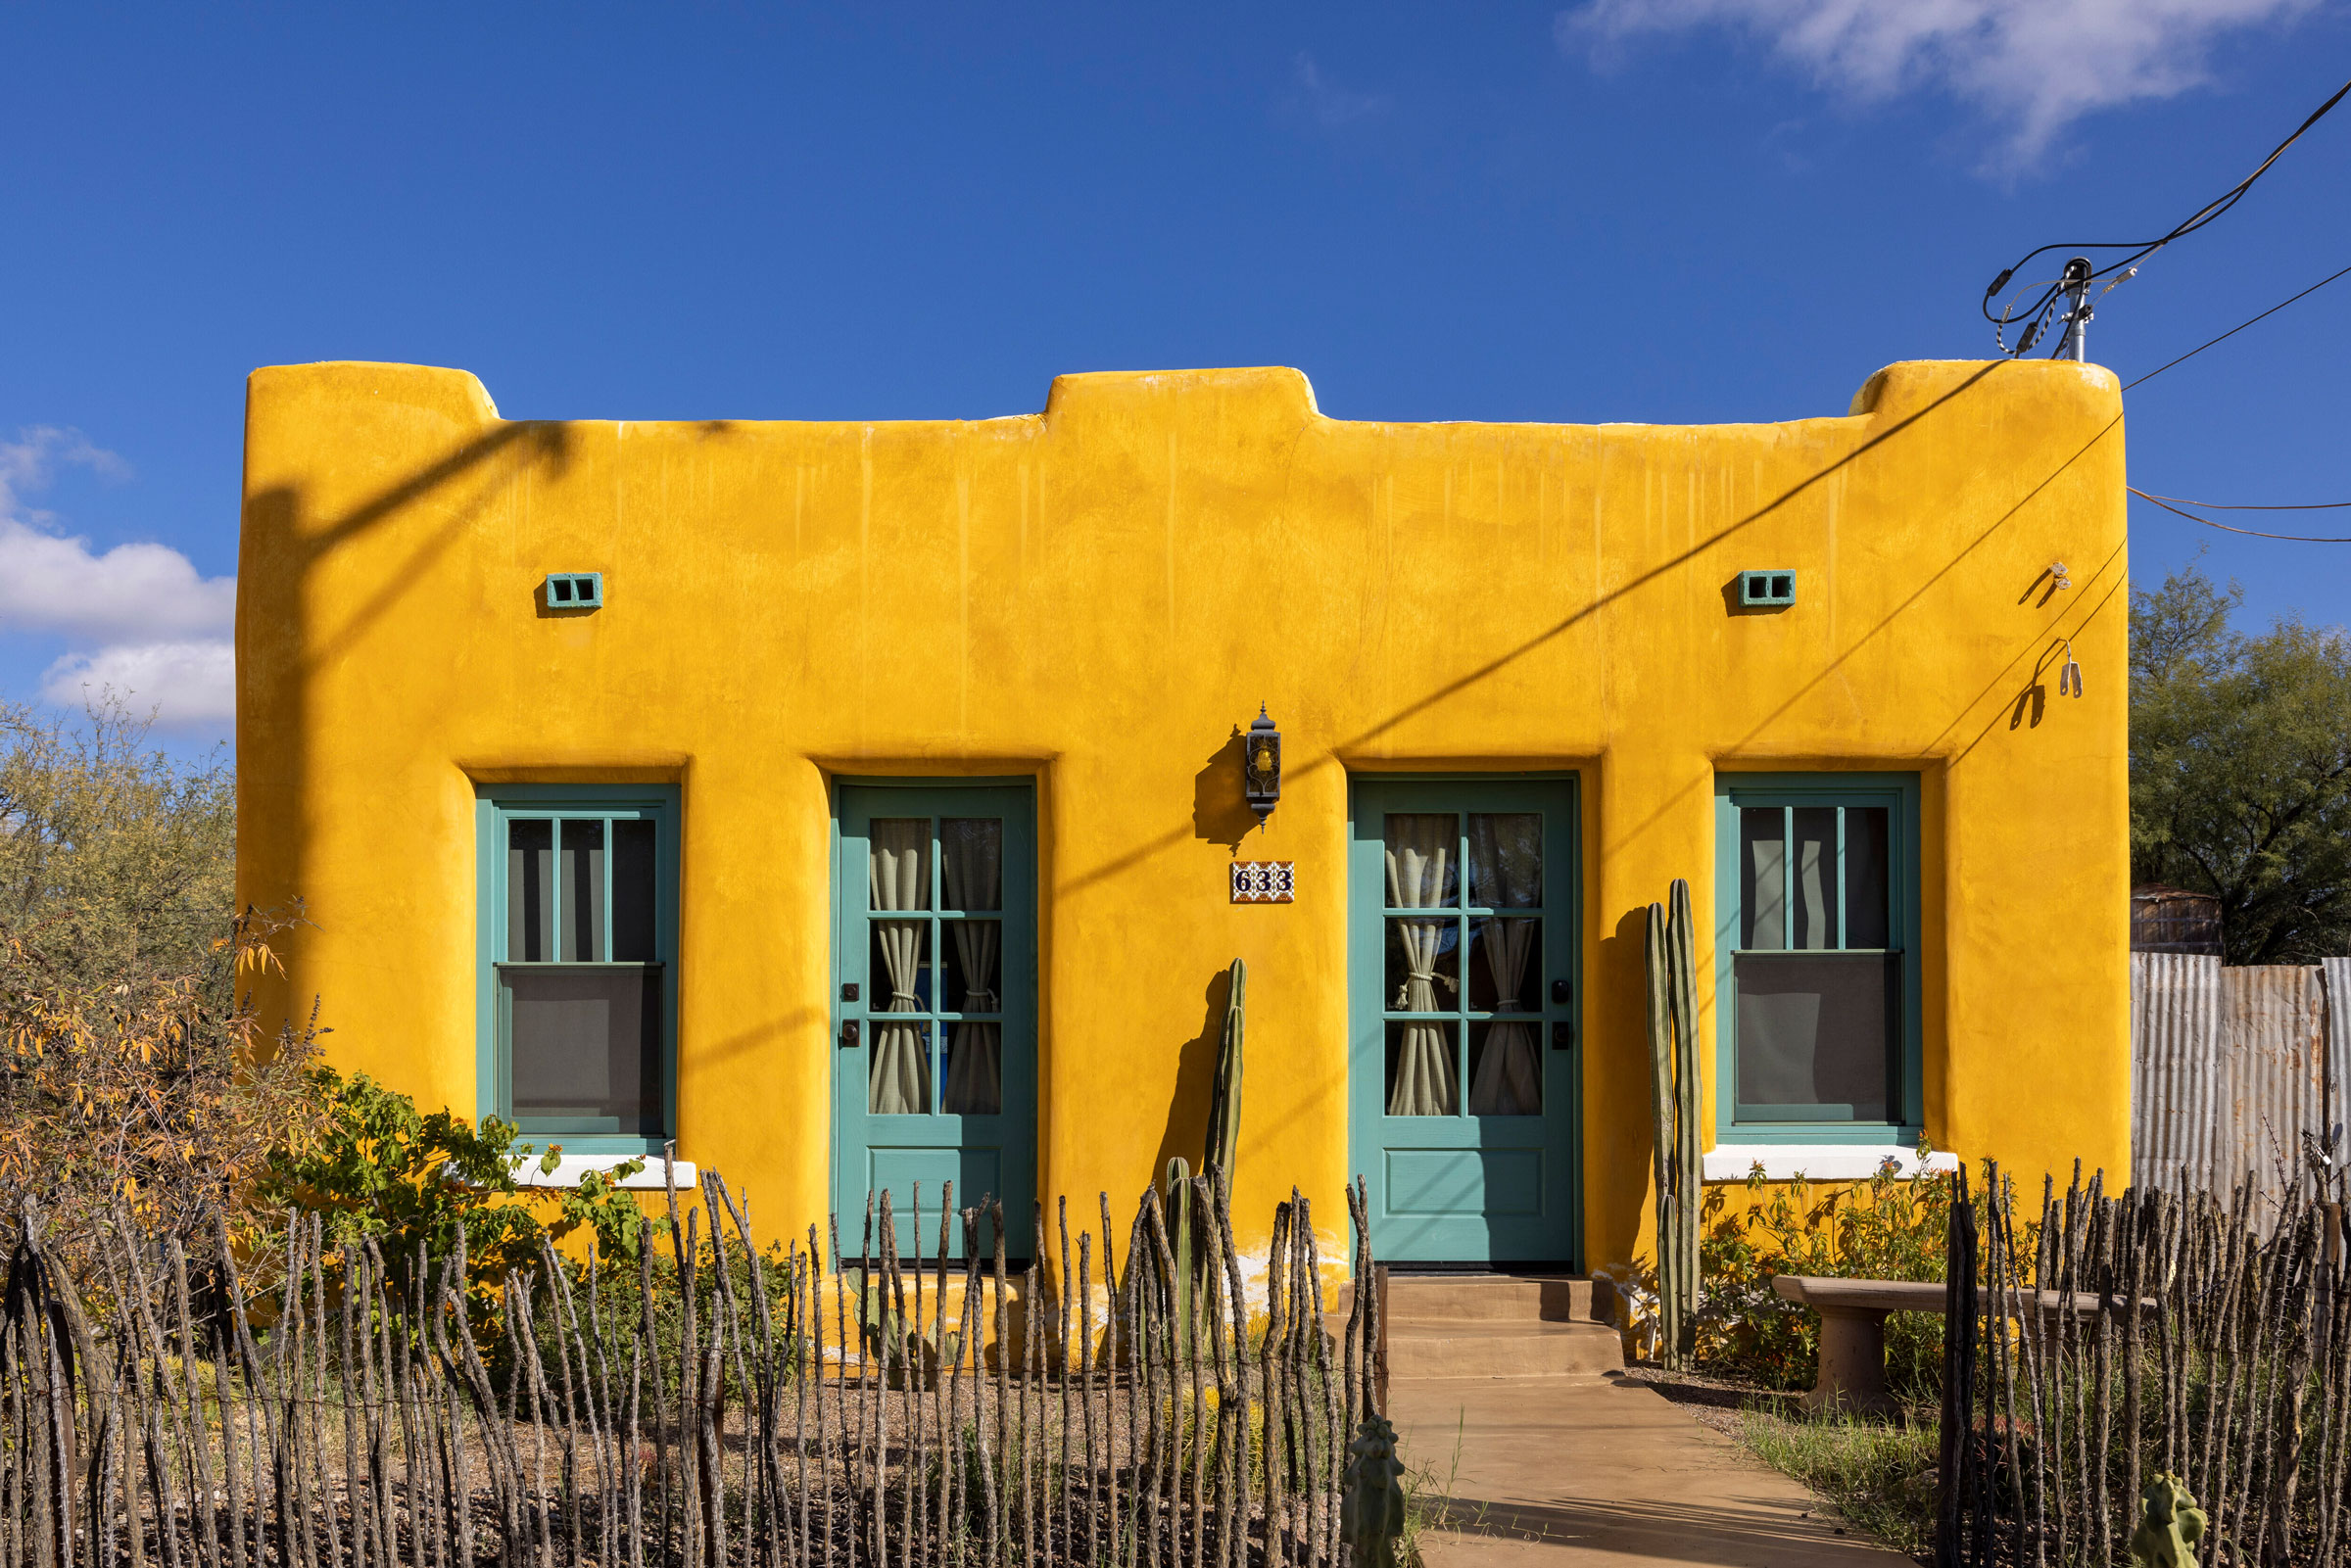 A home in the Barrio Viejo district of Tucson, Ariz. (John Burcham—The New York Times/Redux)